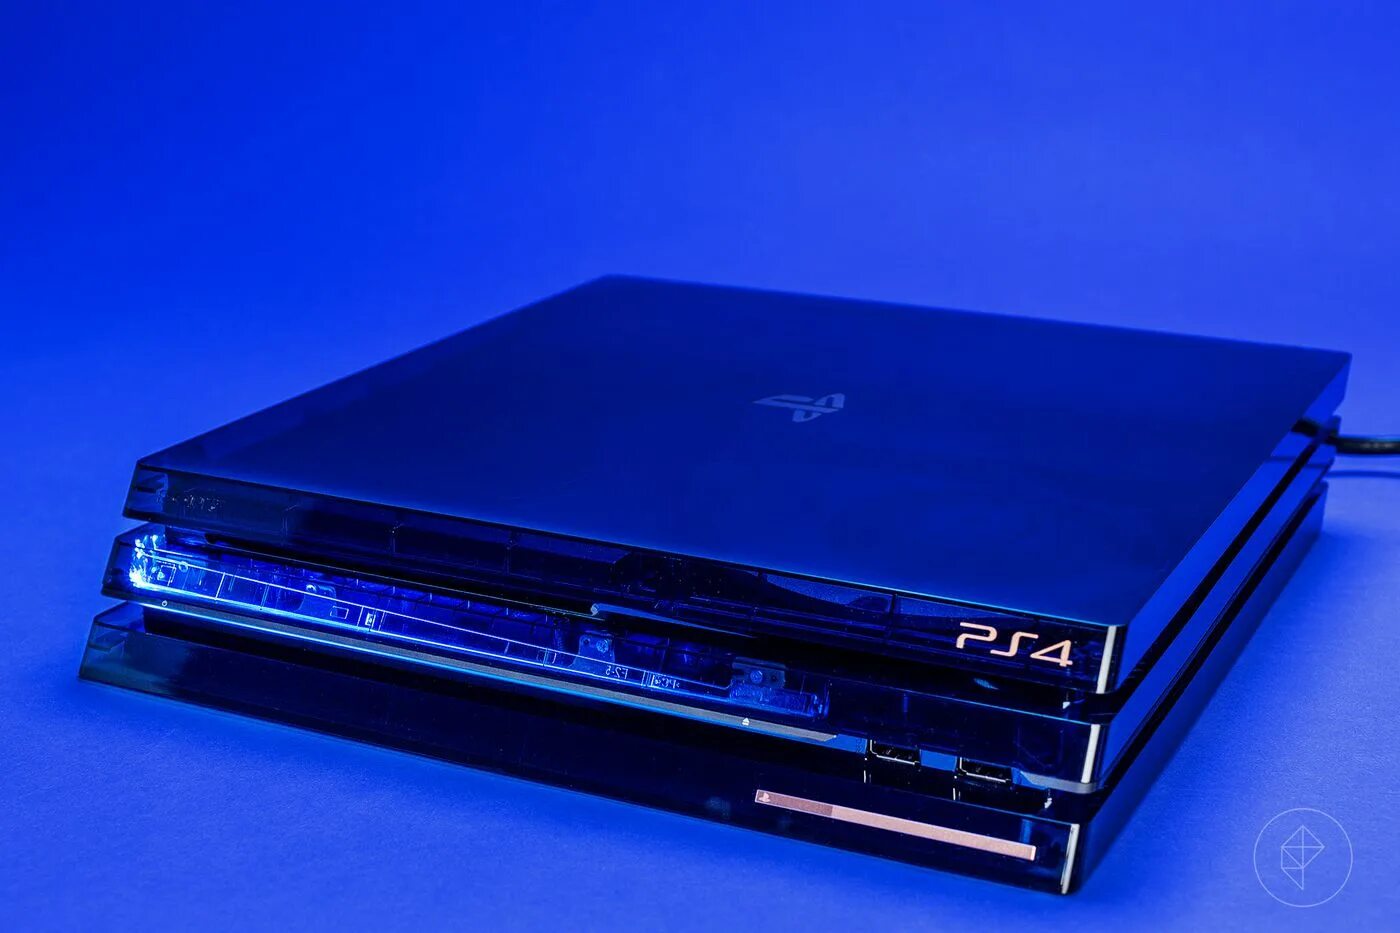 Playstation 4 pro фото. Ps4 500 million Limited Edition. PLAYSTATION 4 Pro. Ps4 Pro Blue. Sony PLAYSTATION 4 Pro Limited Edition Blue.